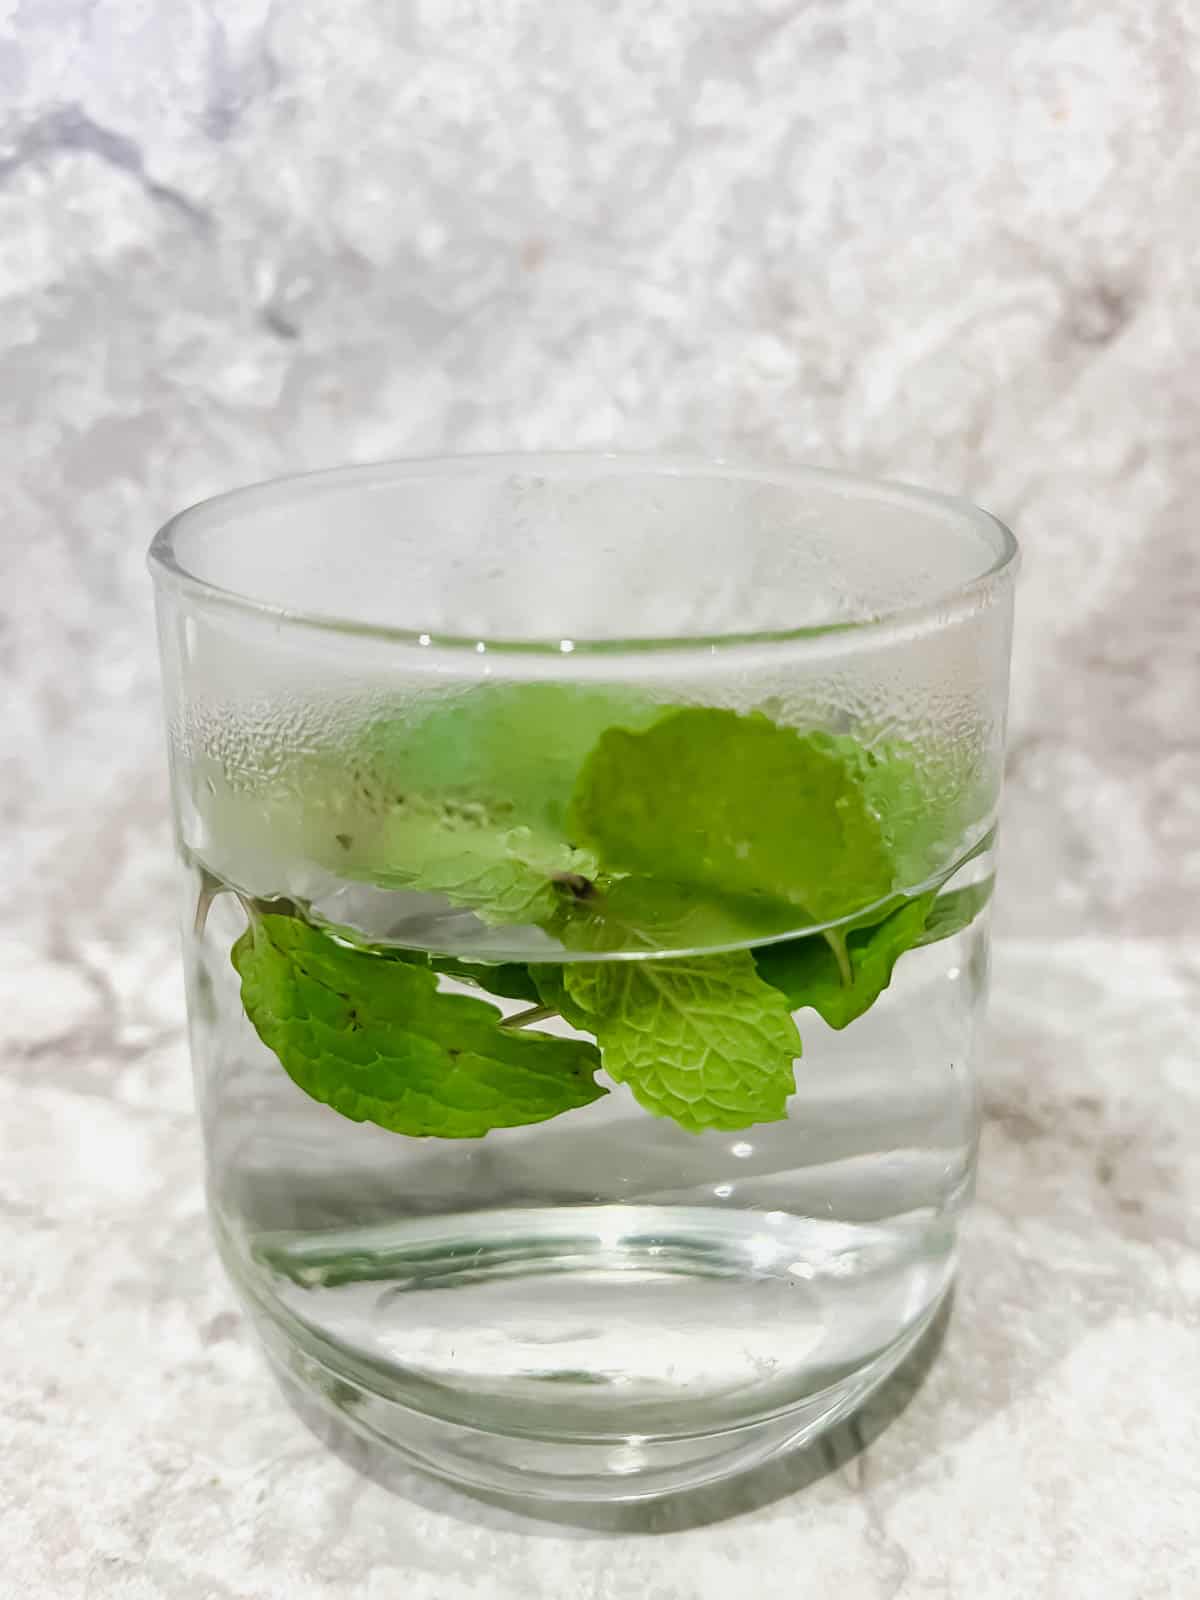 Hot water in a glass with mint leaves inside.